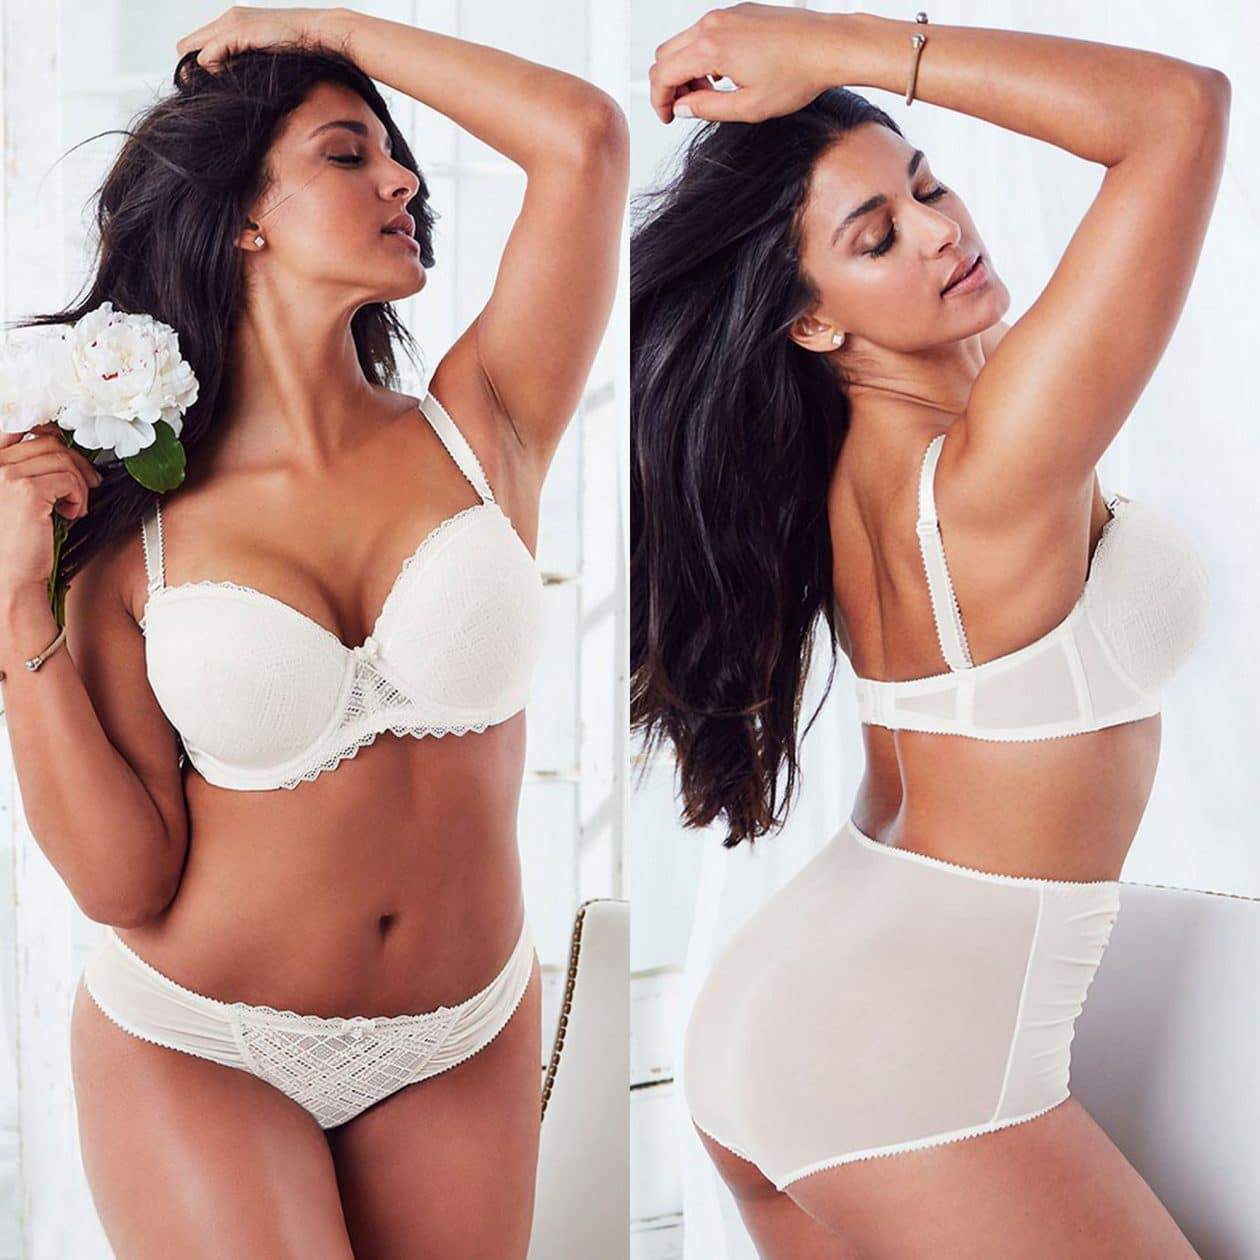 First Look at the Plus Size Lingerie at Adore Me on TheCurvyFashionista.com